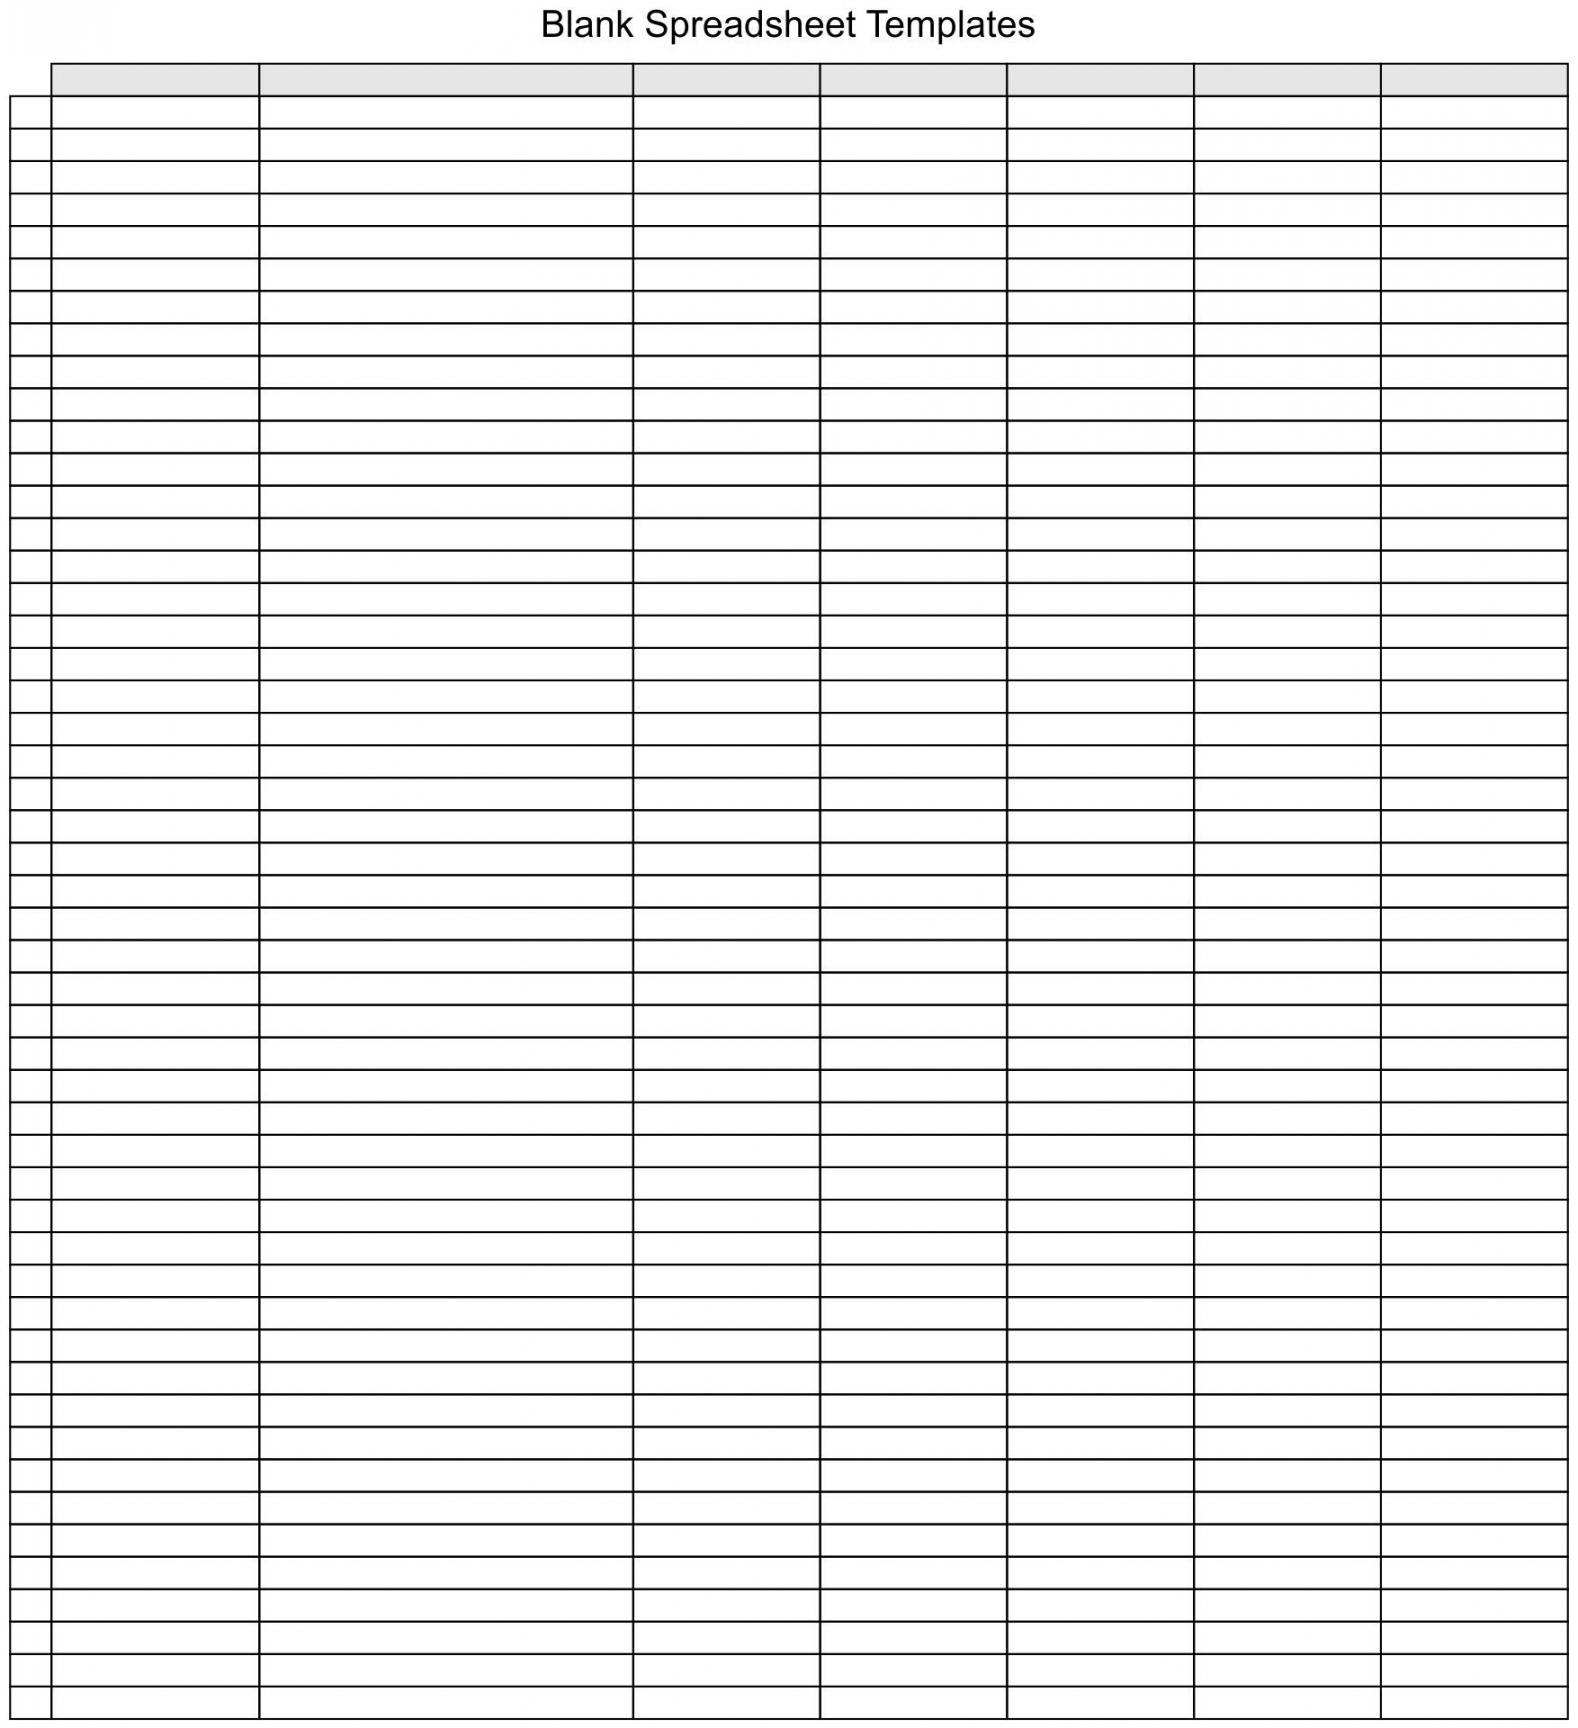 Best Free Printable Spreadsheets Templates - printablee - Free Printable Spreadsheet